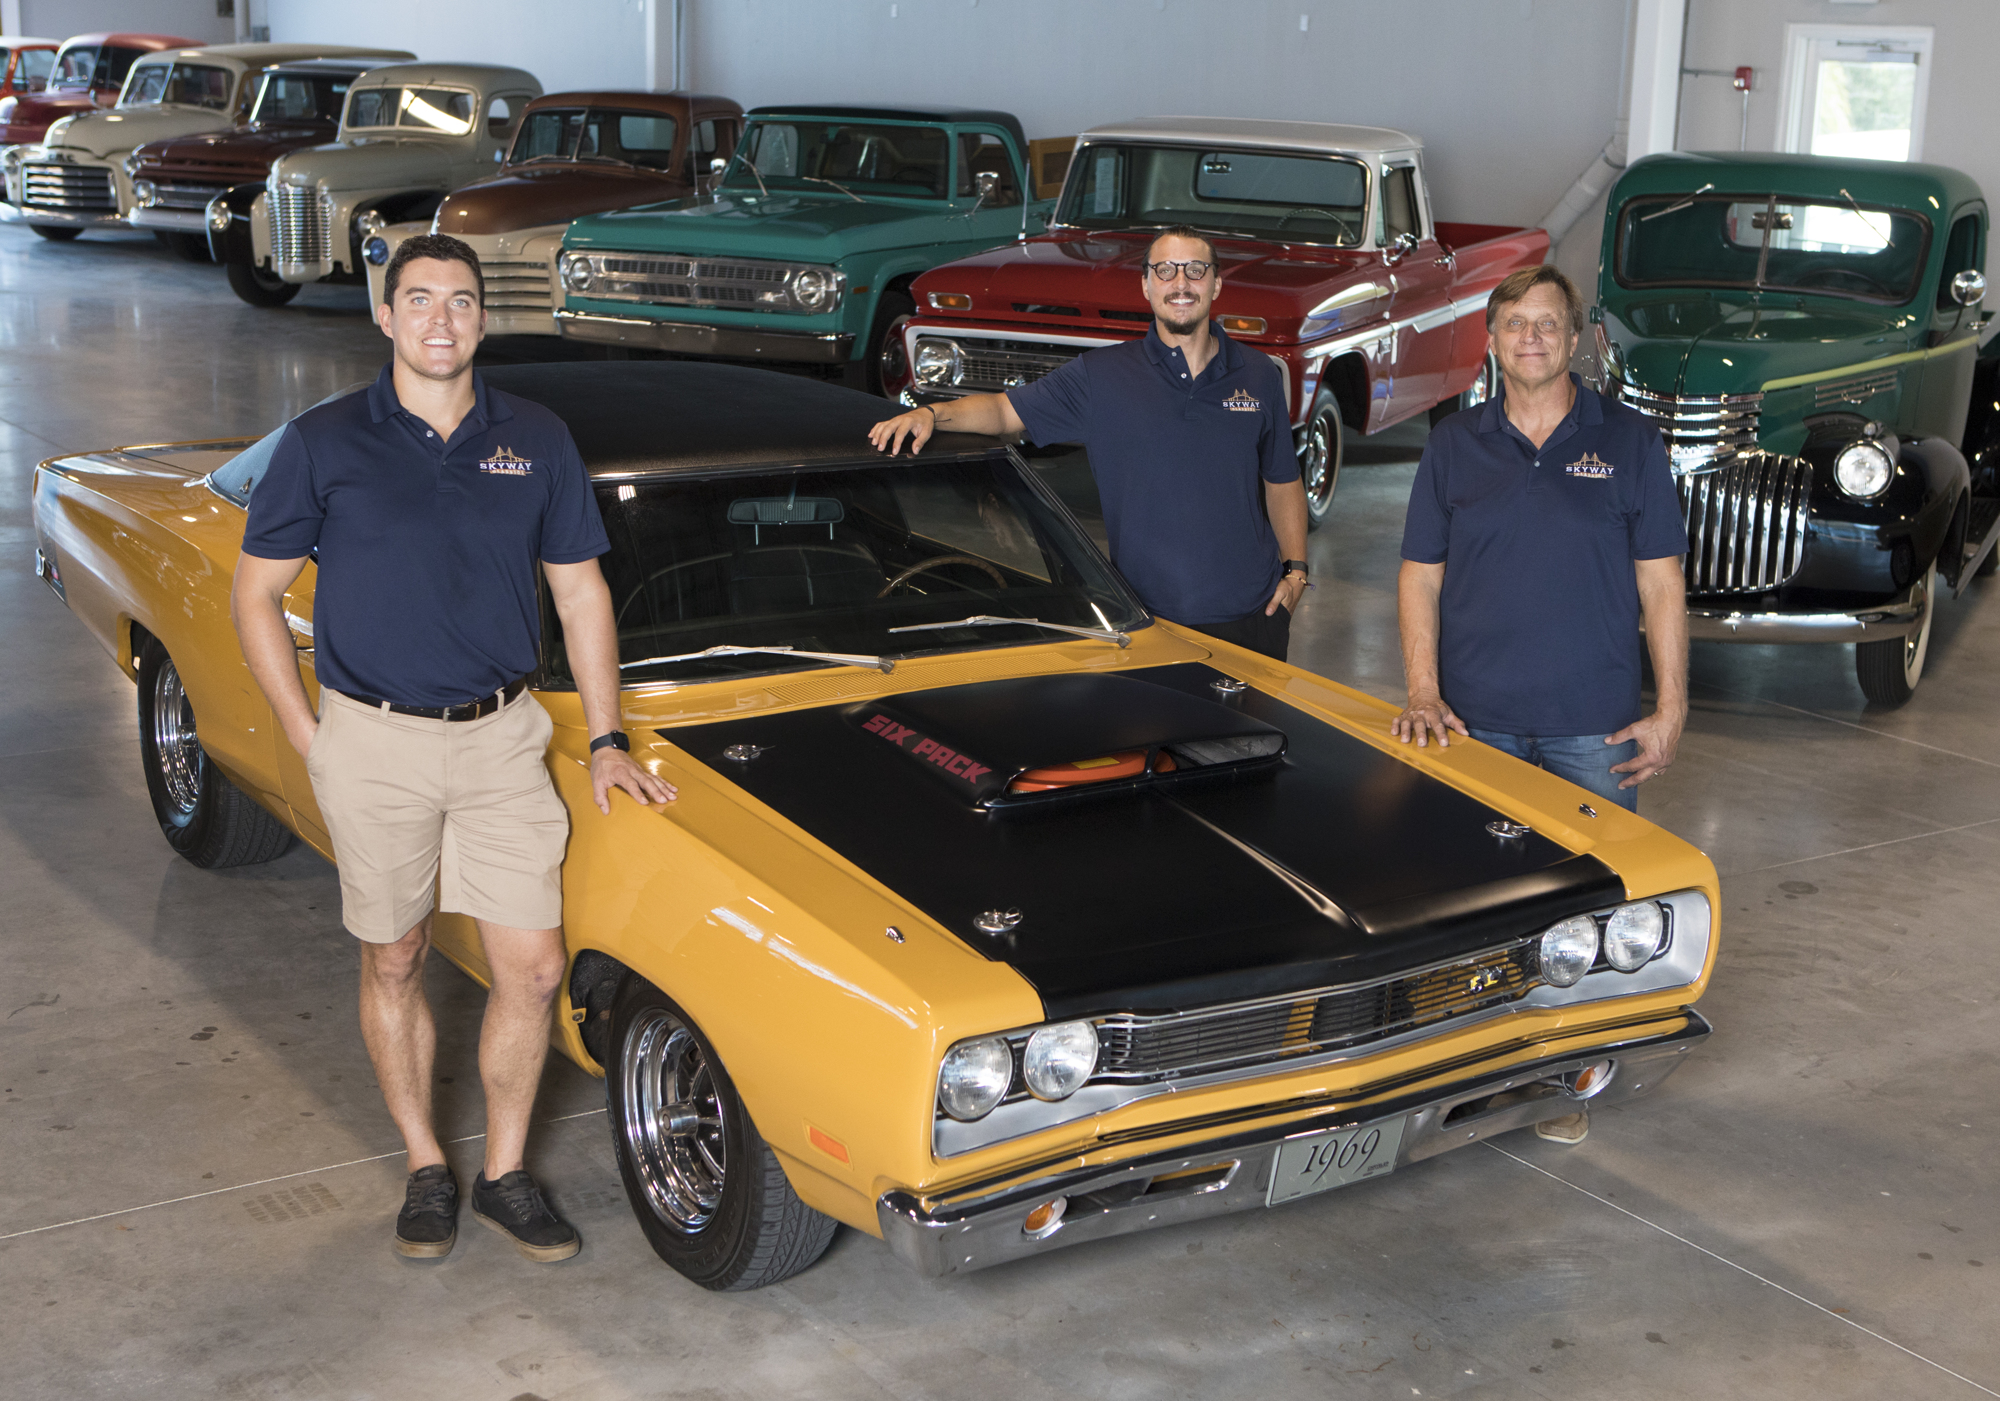 Wemple. Skyway Classics recently moved into a bigger space in Bradenton to fit its needs. From left are Mark Tanski, purchasing and operations co-owner, Ryan Tanski, inventory management, and Allen Tanski, sales co-owner.